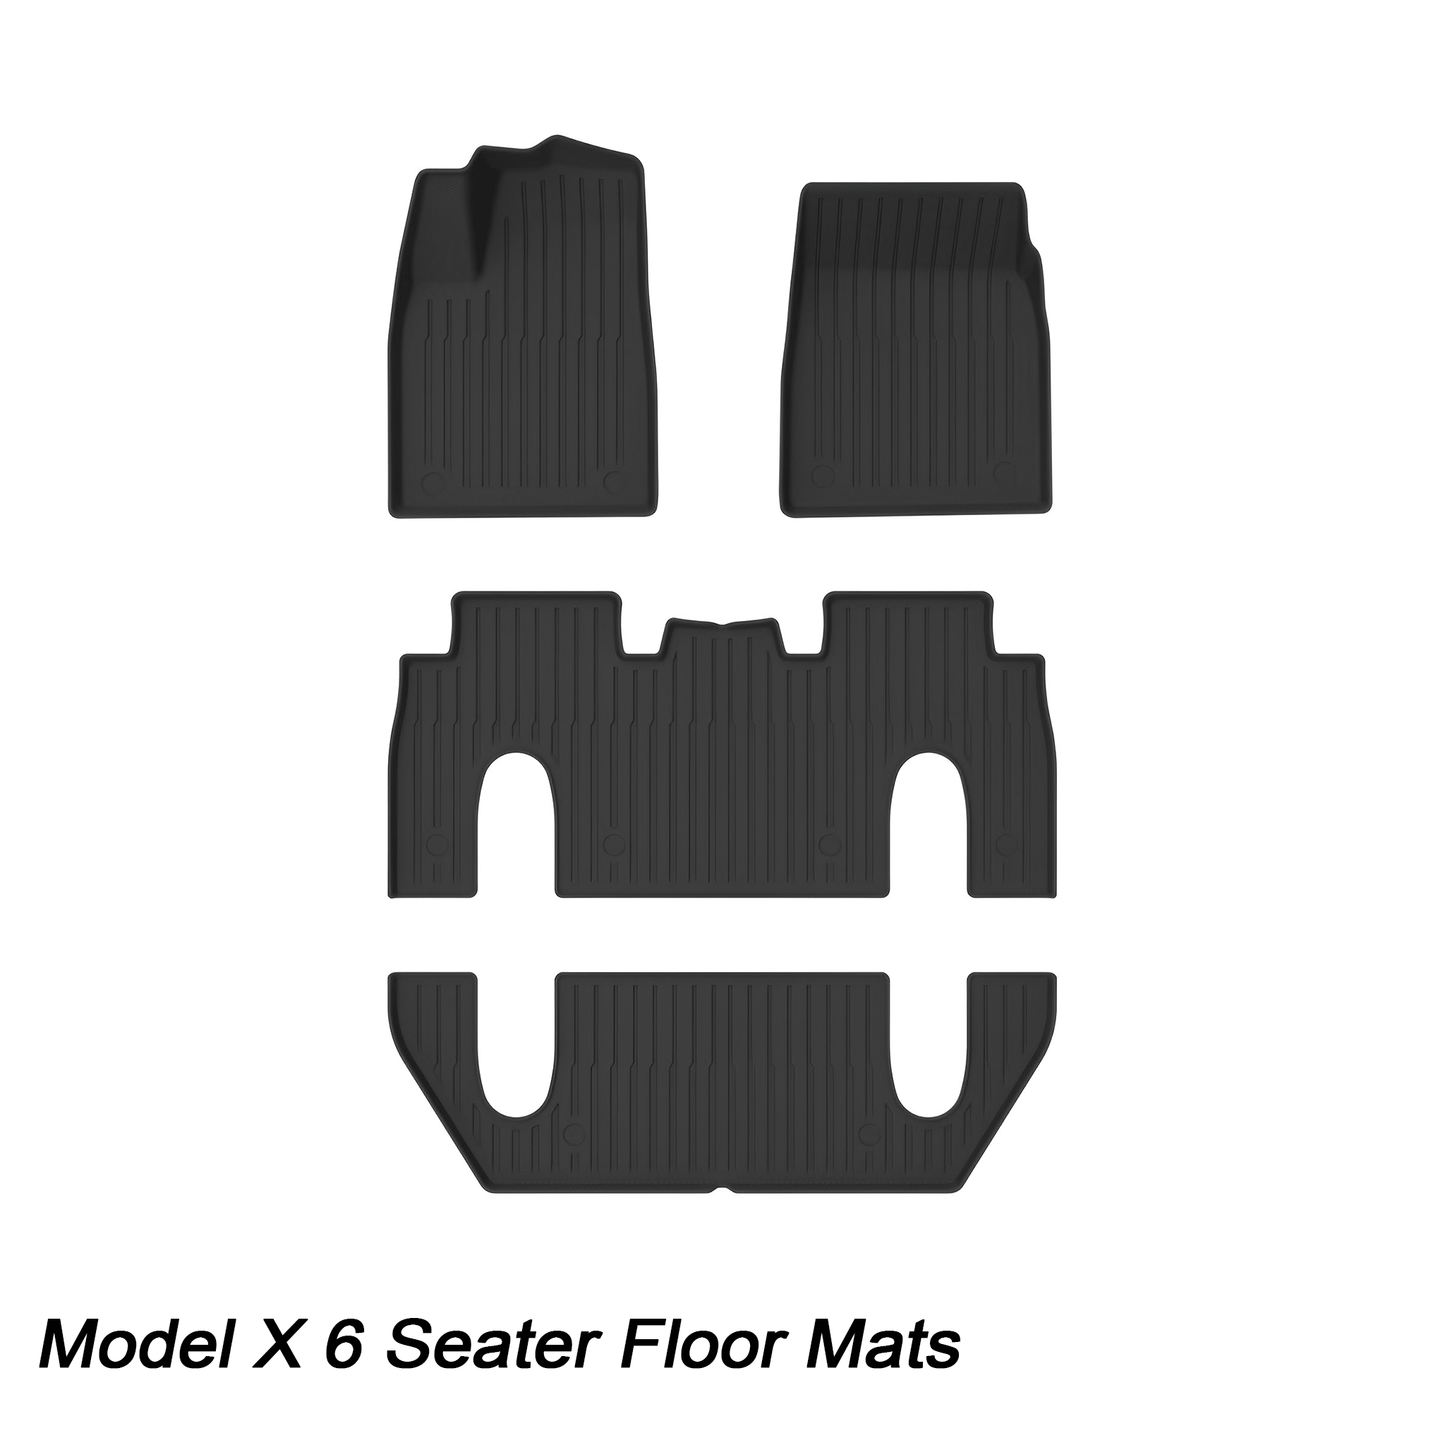 2021-2023 All Weather Floor Mats For Model X (6 Seater)